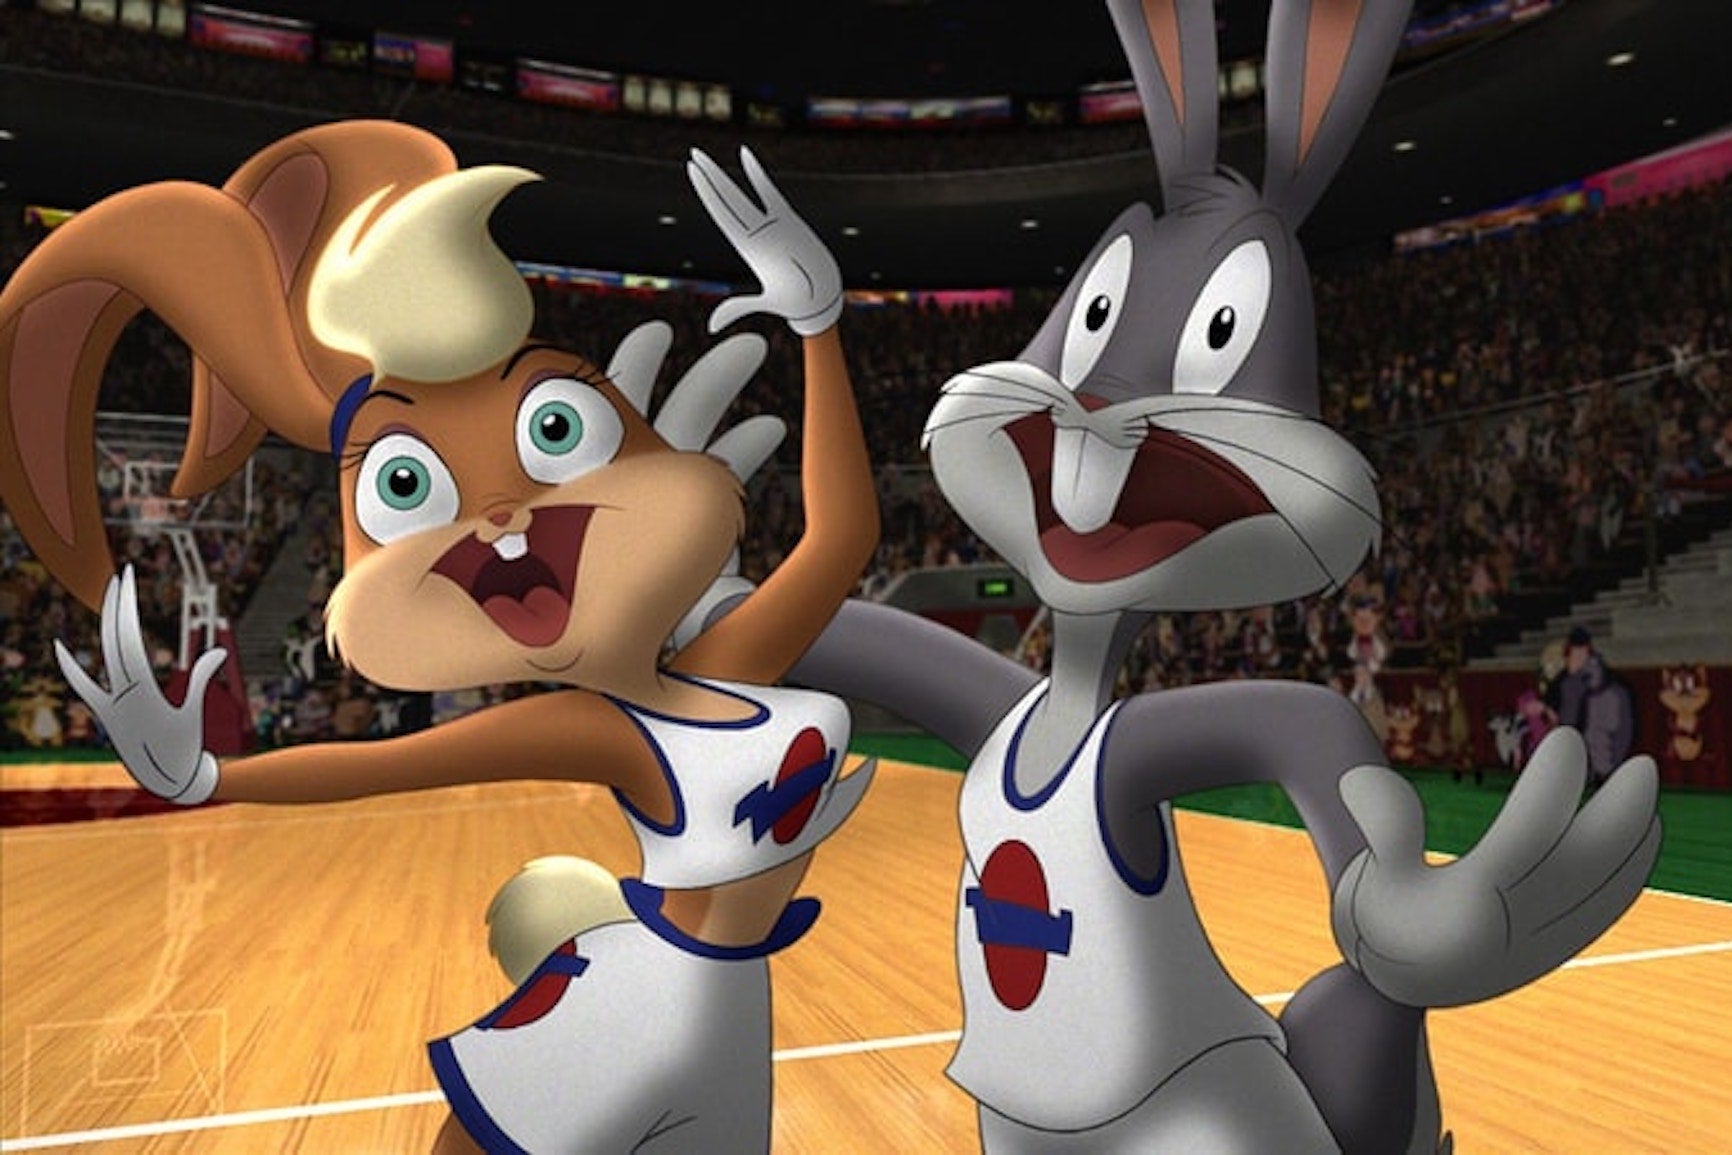 Space Jam 2's Lola Bunny, Pepé Le Pew: The sexy cartoon character won't be  sexy anymore in the new movie